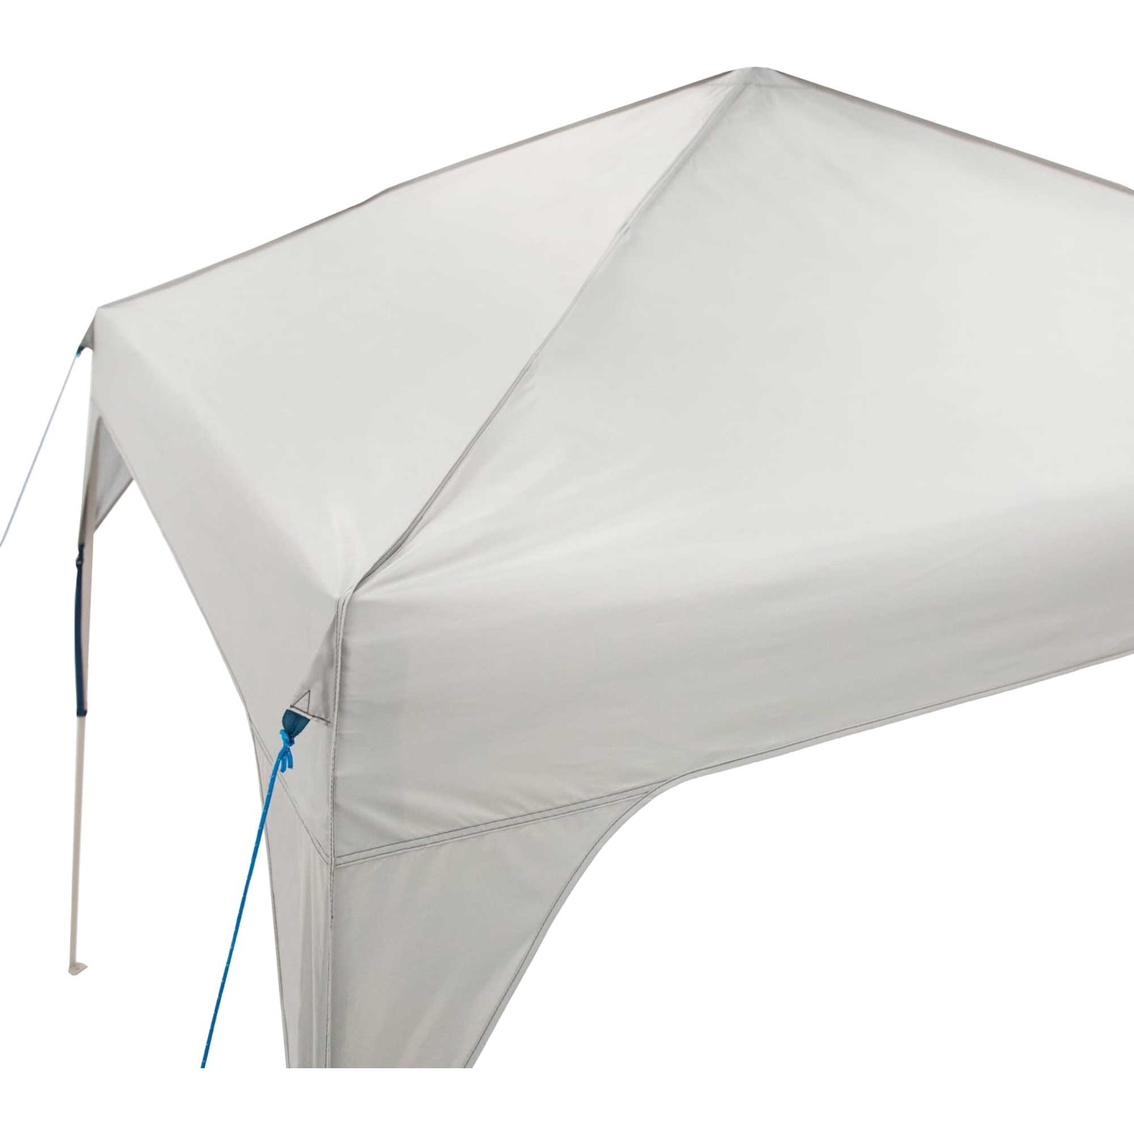 Outdoor Products 10x10 Slant Leg Canopy - Image 4 of 10